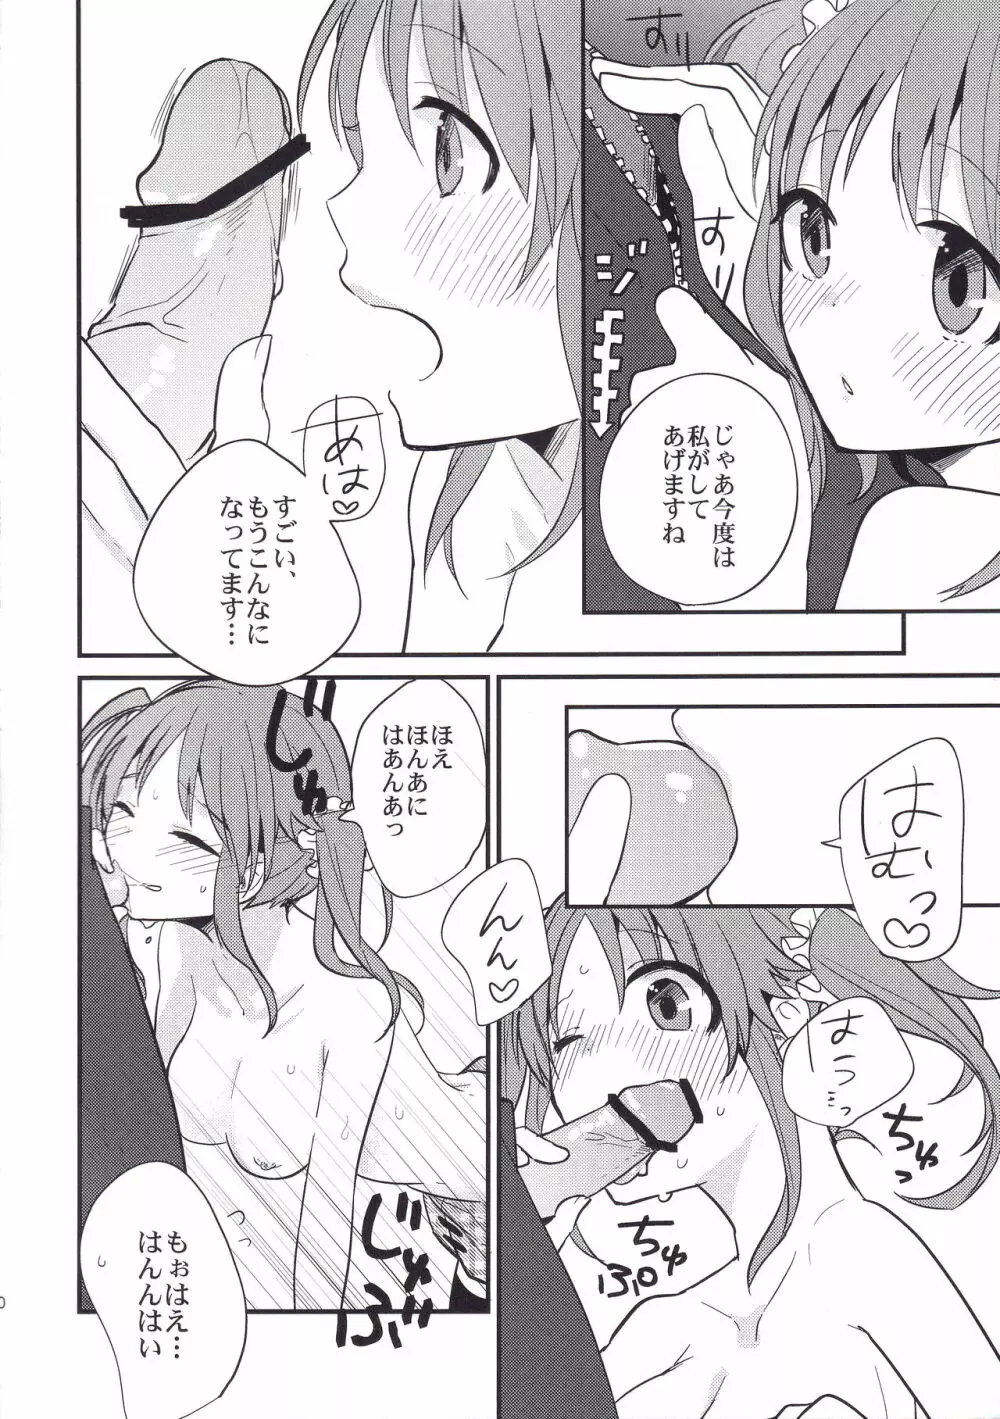 Inside affairs 03 Page.11